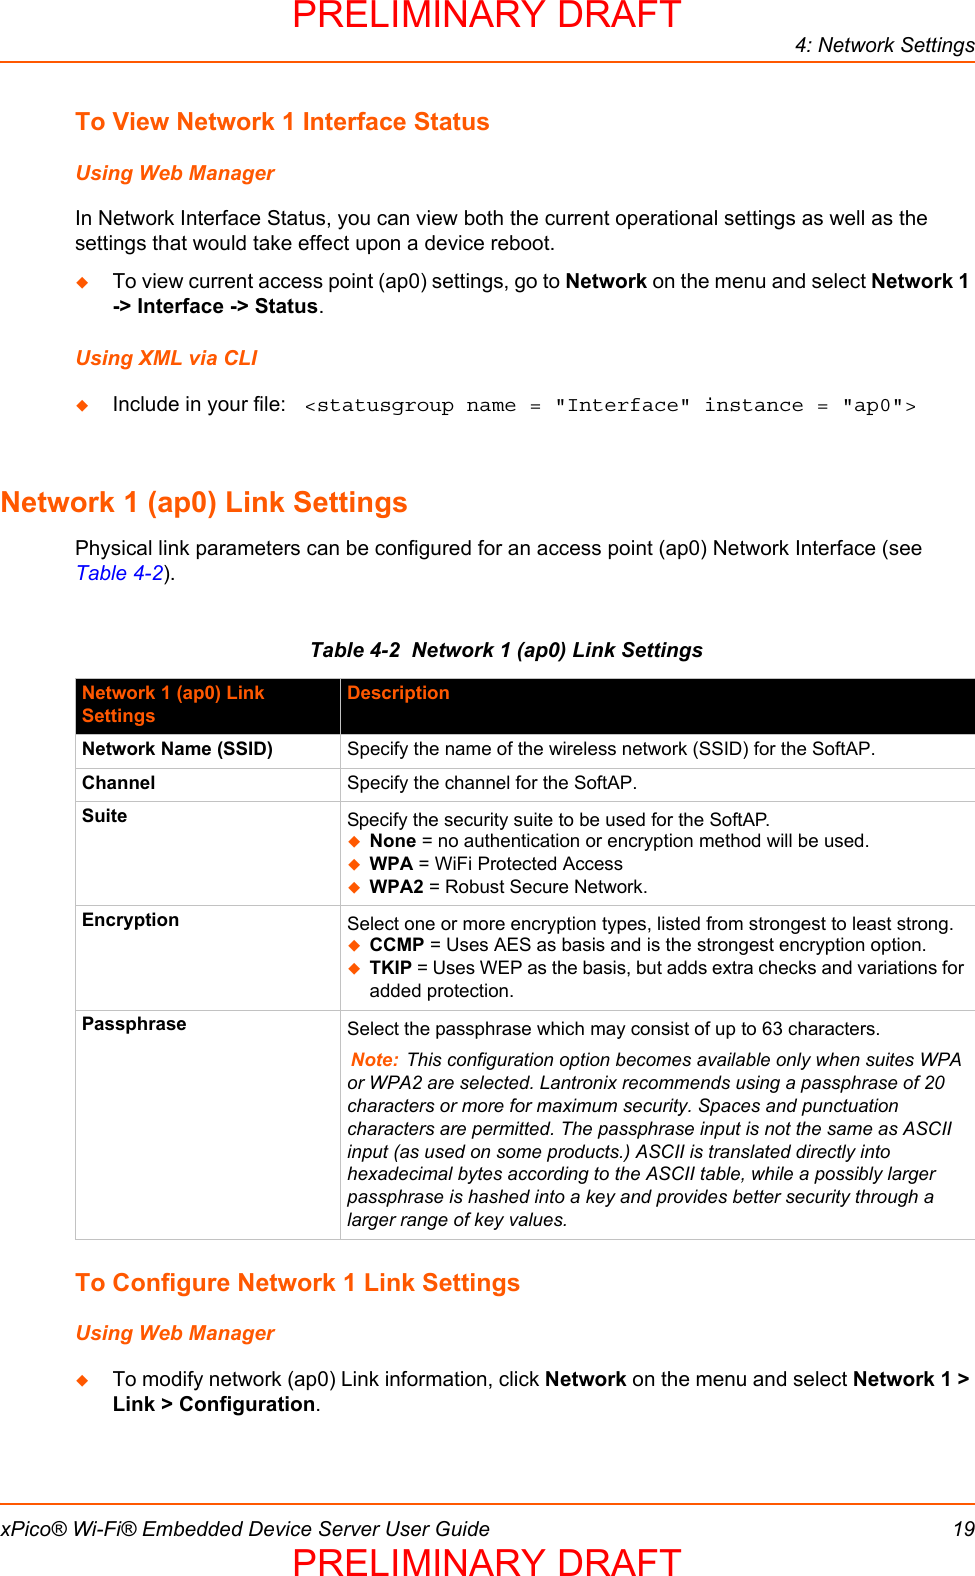 4: Network SettingsxPico® Wi-Fi® Embedded Device Server User Guide 19To View Network 1 Interface StatusUsing Web ManagerIn Network Interface Status, you can view both the current operational settings as well as the settings that would take effect upon a device reboot.  To view current access point (ap0) settings, go to Network on the menu and select Network 1 -&gt; Interface -&gt; Status.Using XML via CLIInclude in your file:  &lt;statusgroup name = &quot;Interface&quot; instance = &quot;ap0&quot;&gt;Network 1 (ap0) Link SettingsPhysical link parameters can be configured for an access point (ap0) Network Interface (see Table 4-2).Table 4-2  Network 1 (ap0) Link SettingsTo Configure Network 1 Link SettingsUsing Web ManagerTo modify network (ap0) Link information, click Network on the menu and select Network 1 &gt; Link &gt; Configuration.Network 1 (ap0) Link SettingsDescriptionNetwork Name (SSID) Specify the name of the wireless network (SSID) for the SoftAP.Channel Specify the channel for the SoftAP.Suite Specify the security suite to be used for the SoftAP.None = no authentication or encryption method will be used.WPA = WiFi Protected AccessWPA2 = Robust Secure Network.Encryption Select one or more encryption types, listed from strongest to least strong. CCMP = Uses AES as basis and is the strongest encryption option.TKIP = Uses WEP as the basis, but adds extra checks and variations for added protection.Passphrase Select the passphrase which may consist of up to 63 characters.Note: This configuration option becomes available only when suites WPA or WPA2 are selected. Lantronix recommends using a passphrase of 20 characters or more for maximum security. Spaces and punctuation characters are permitted. The passphrase input is not the same as ASCII input (as used on some products.) ASCII is translated directly into hexadecimal bytes according to the ASCII table, while a possibly larger passphrase is hashed into a key and provides better security through a larger range of key values.PRELIMINARY DRAFTPRELIMINARY DRAFT